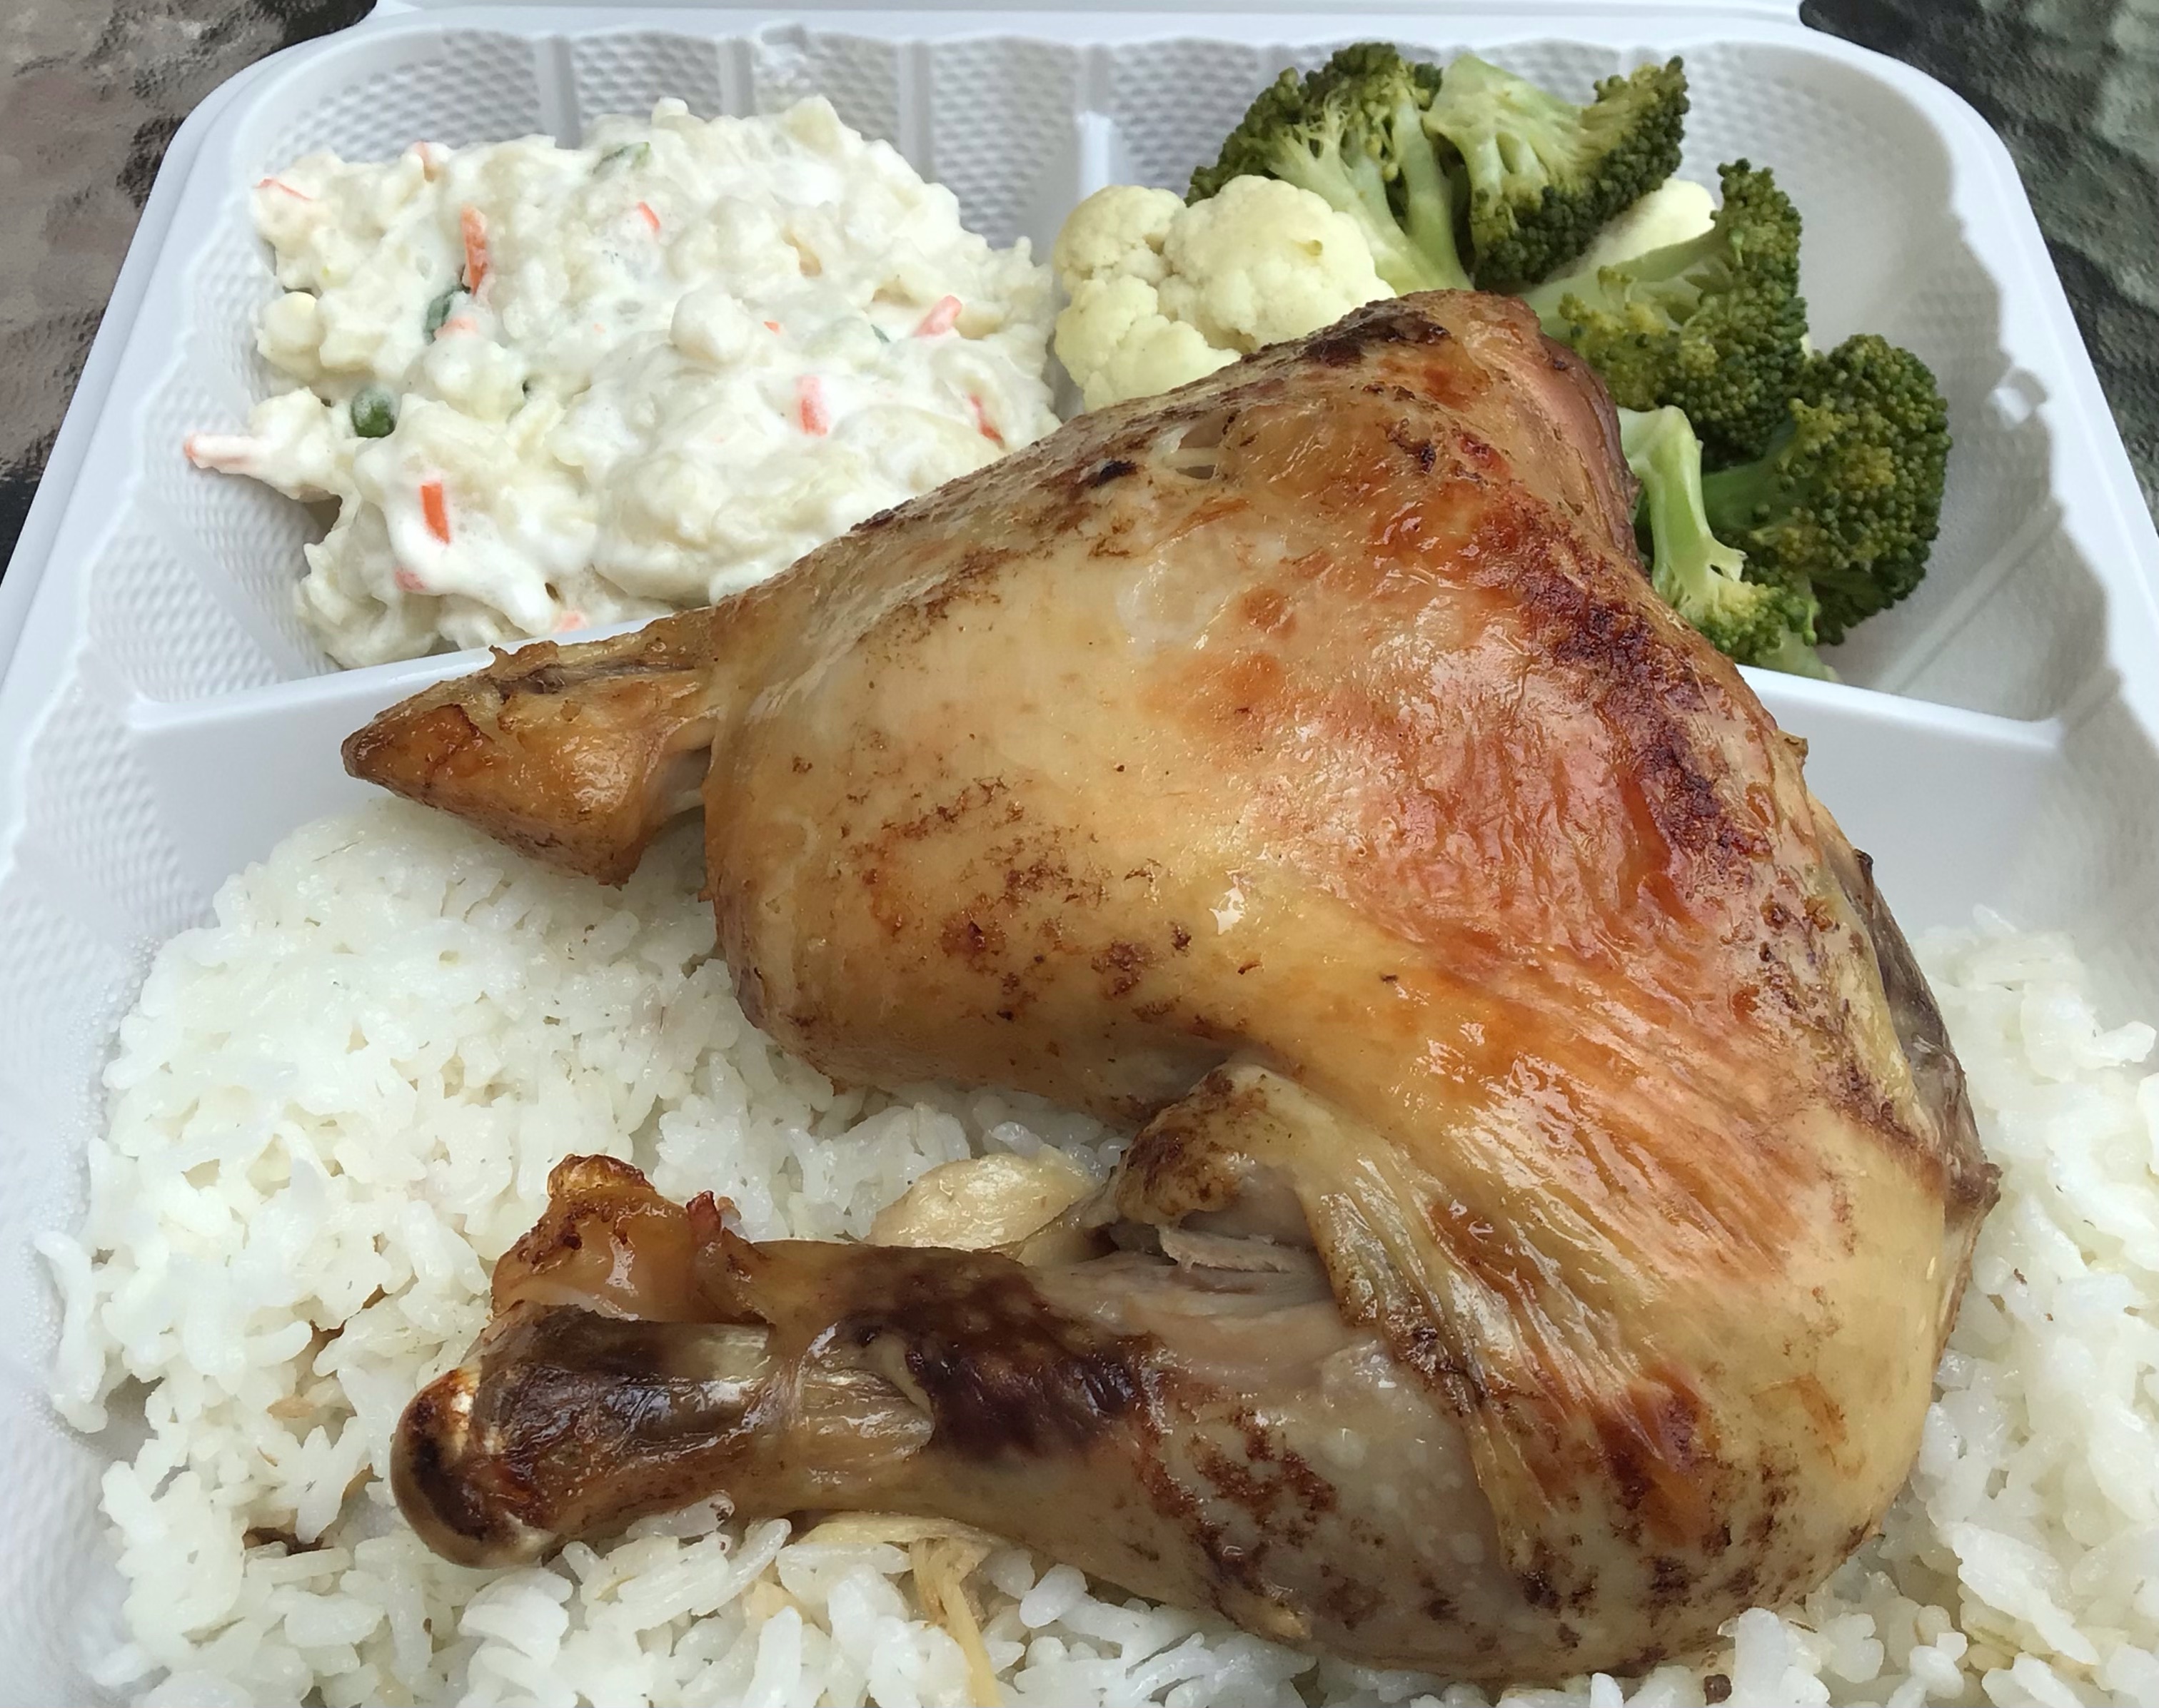 A white plastic to-go tray holds huli huli chicken (white rice topped with a roasted chicken leg quarter), a side of Hawaiian macaroni salad, and a side of steamed vegetables (broccoli and cauliflower are visible). Photo by Rachael McMillan.